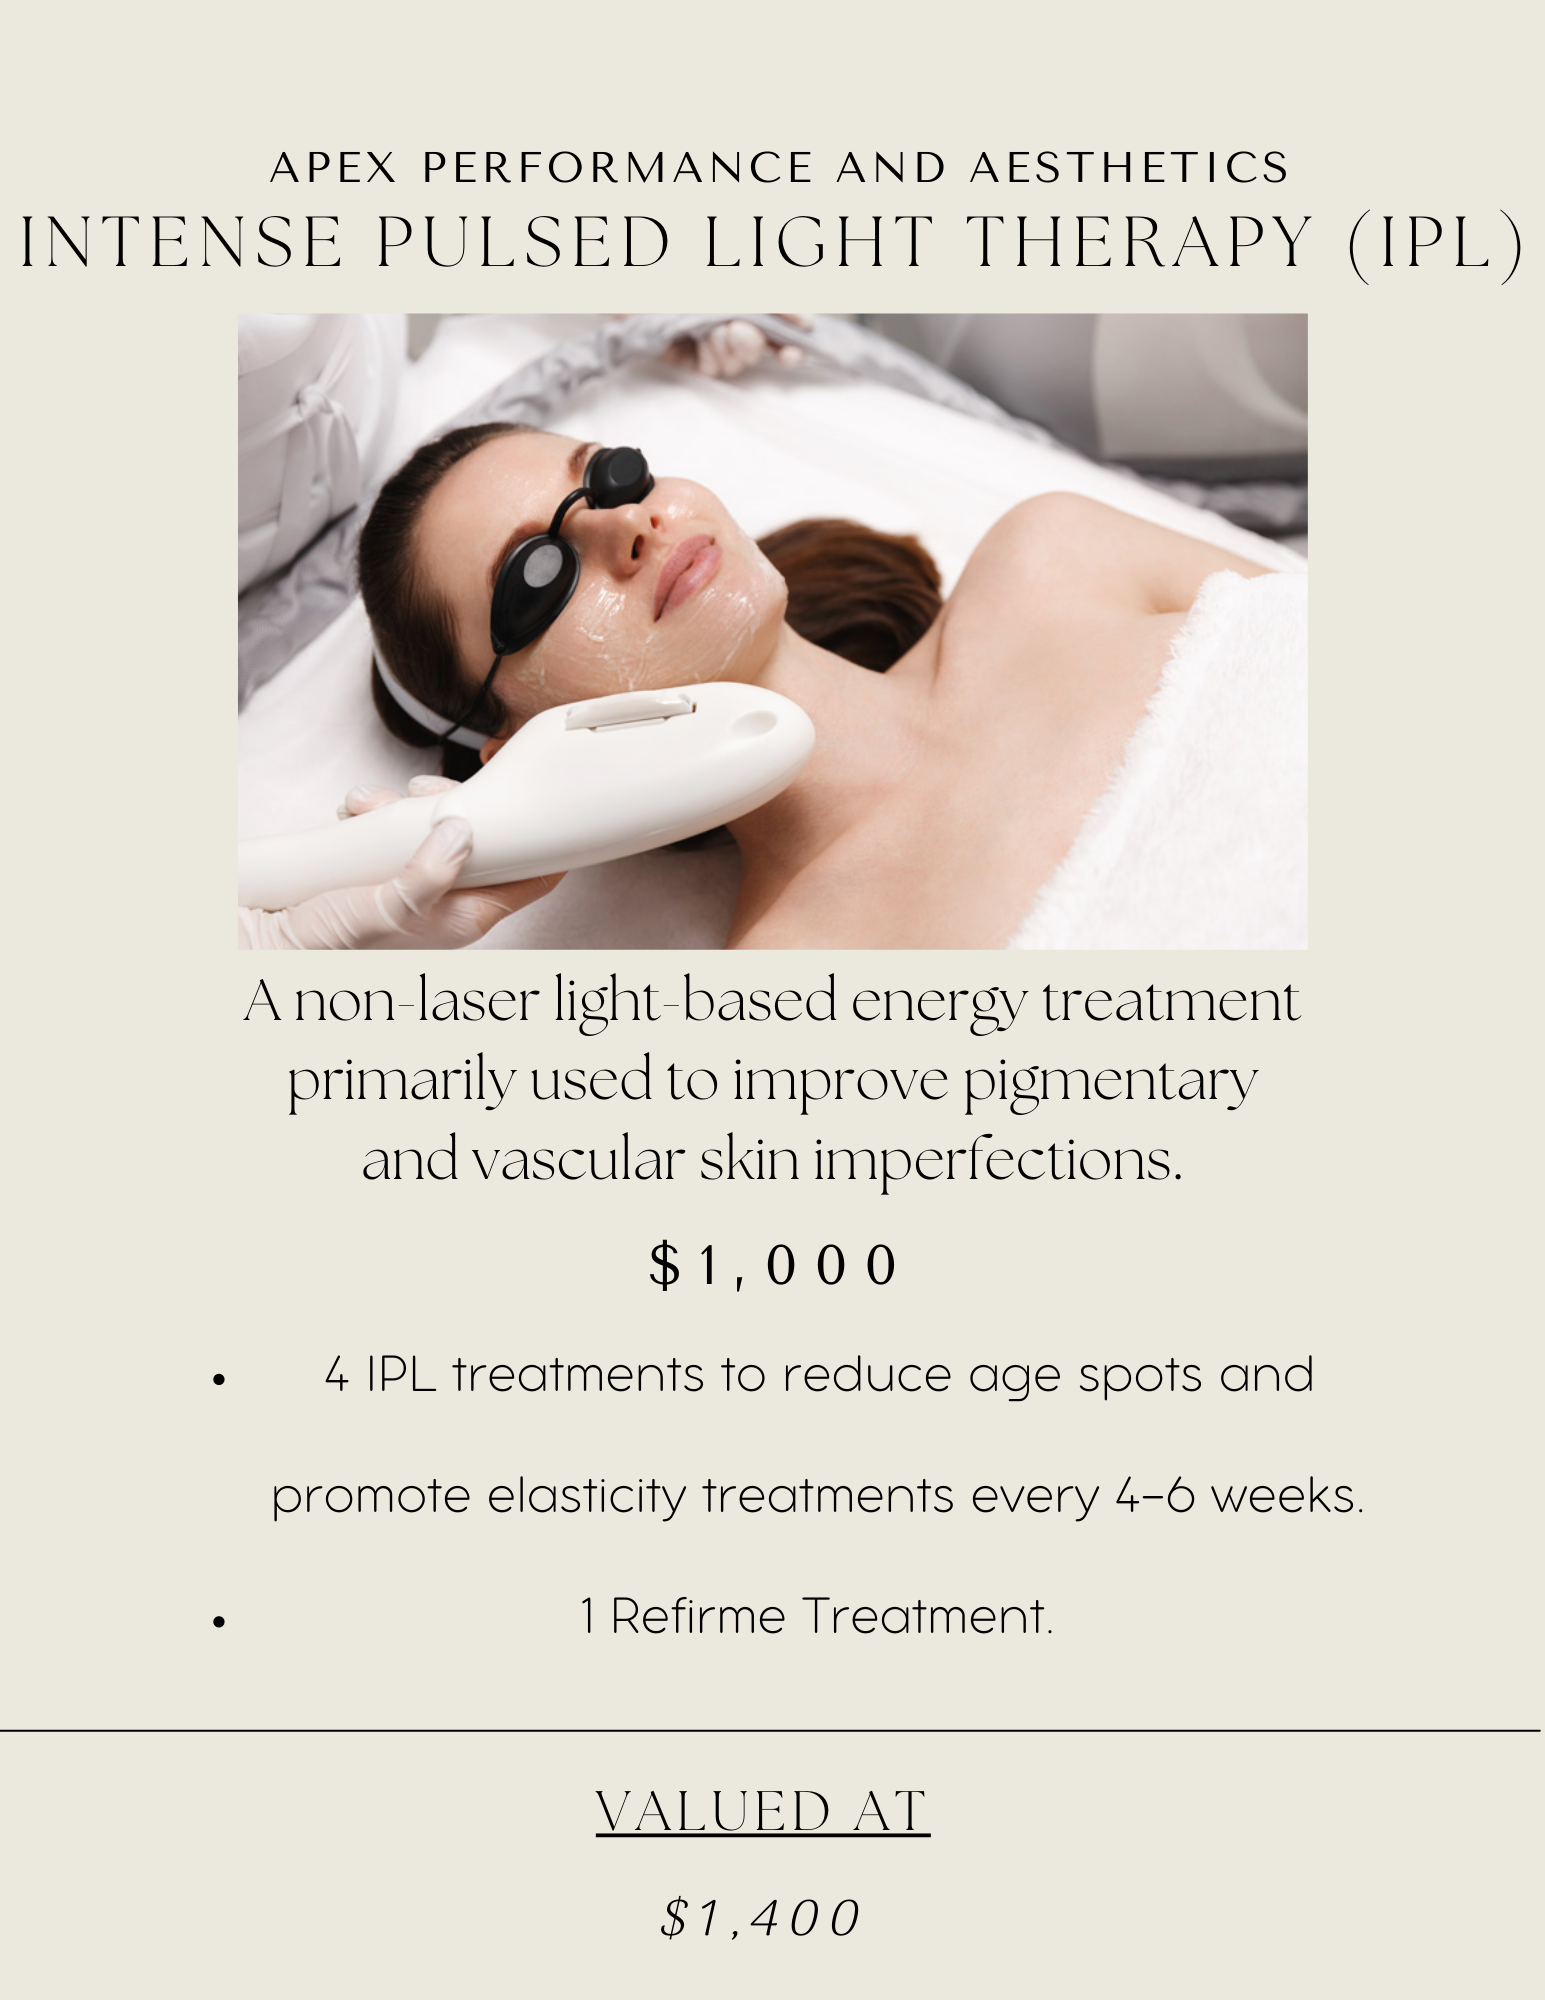 IPL Intense Pulsed Light Therapy - Package | APEX Performance & Aesthetics in Sandy, UT